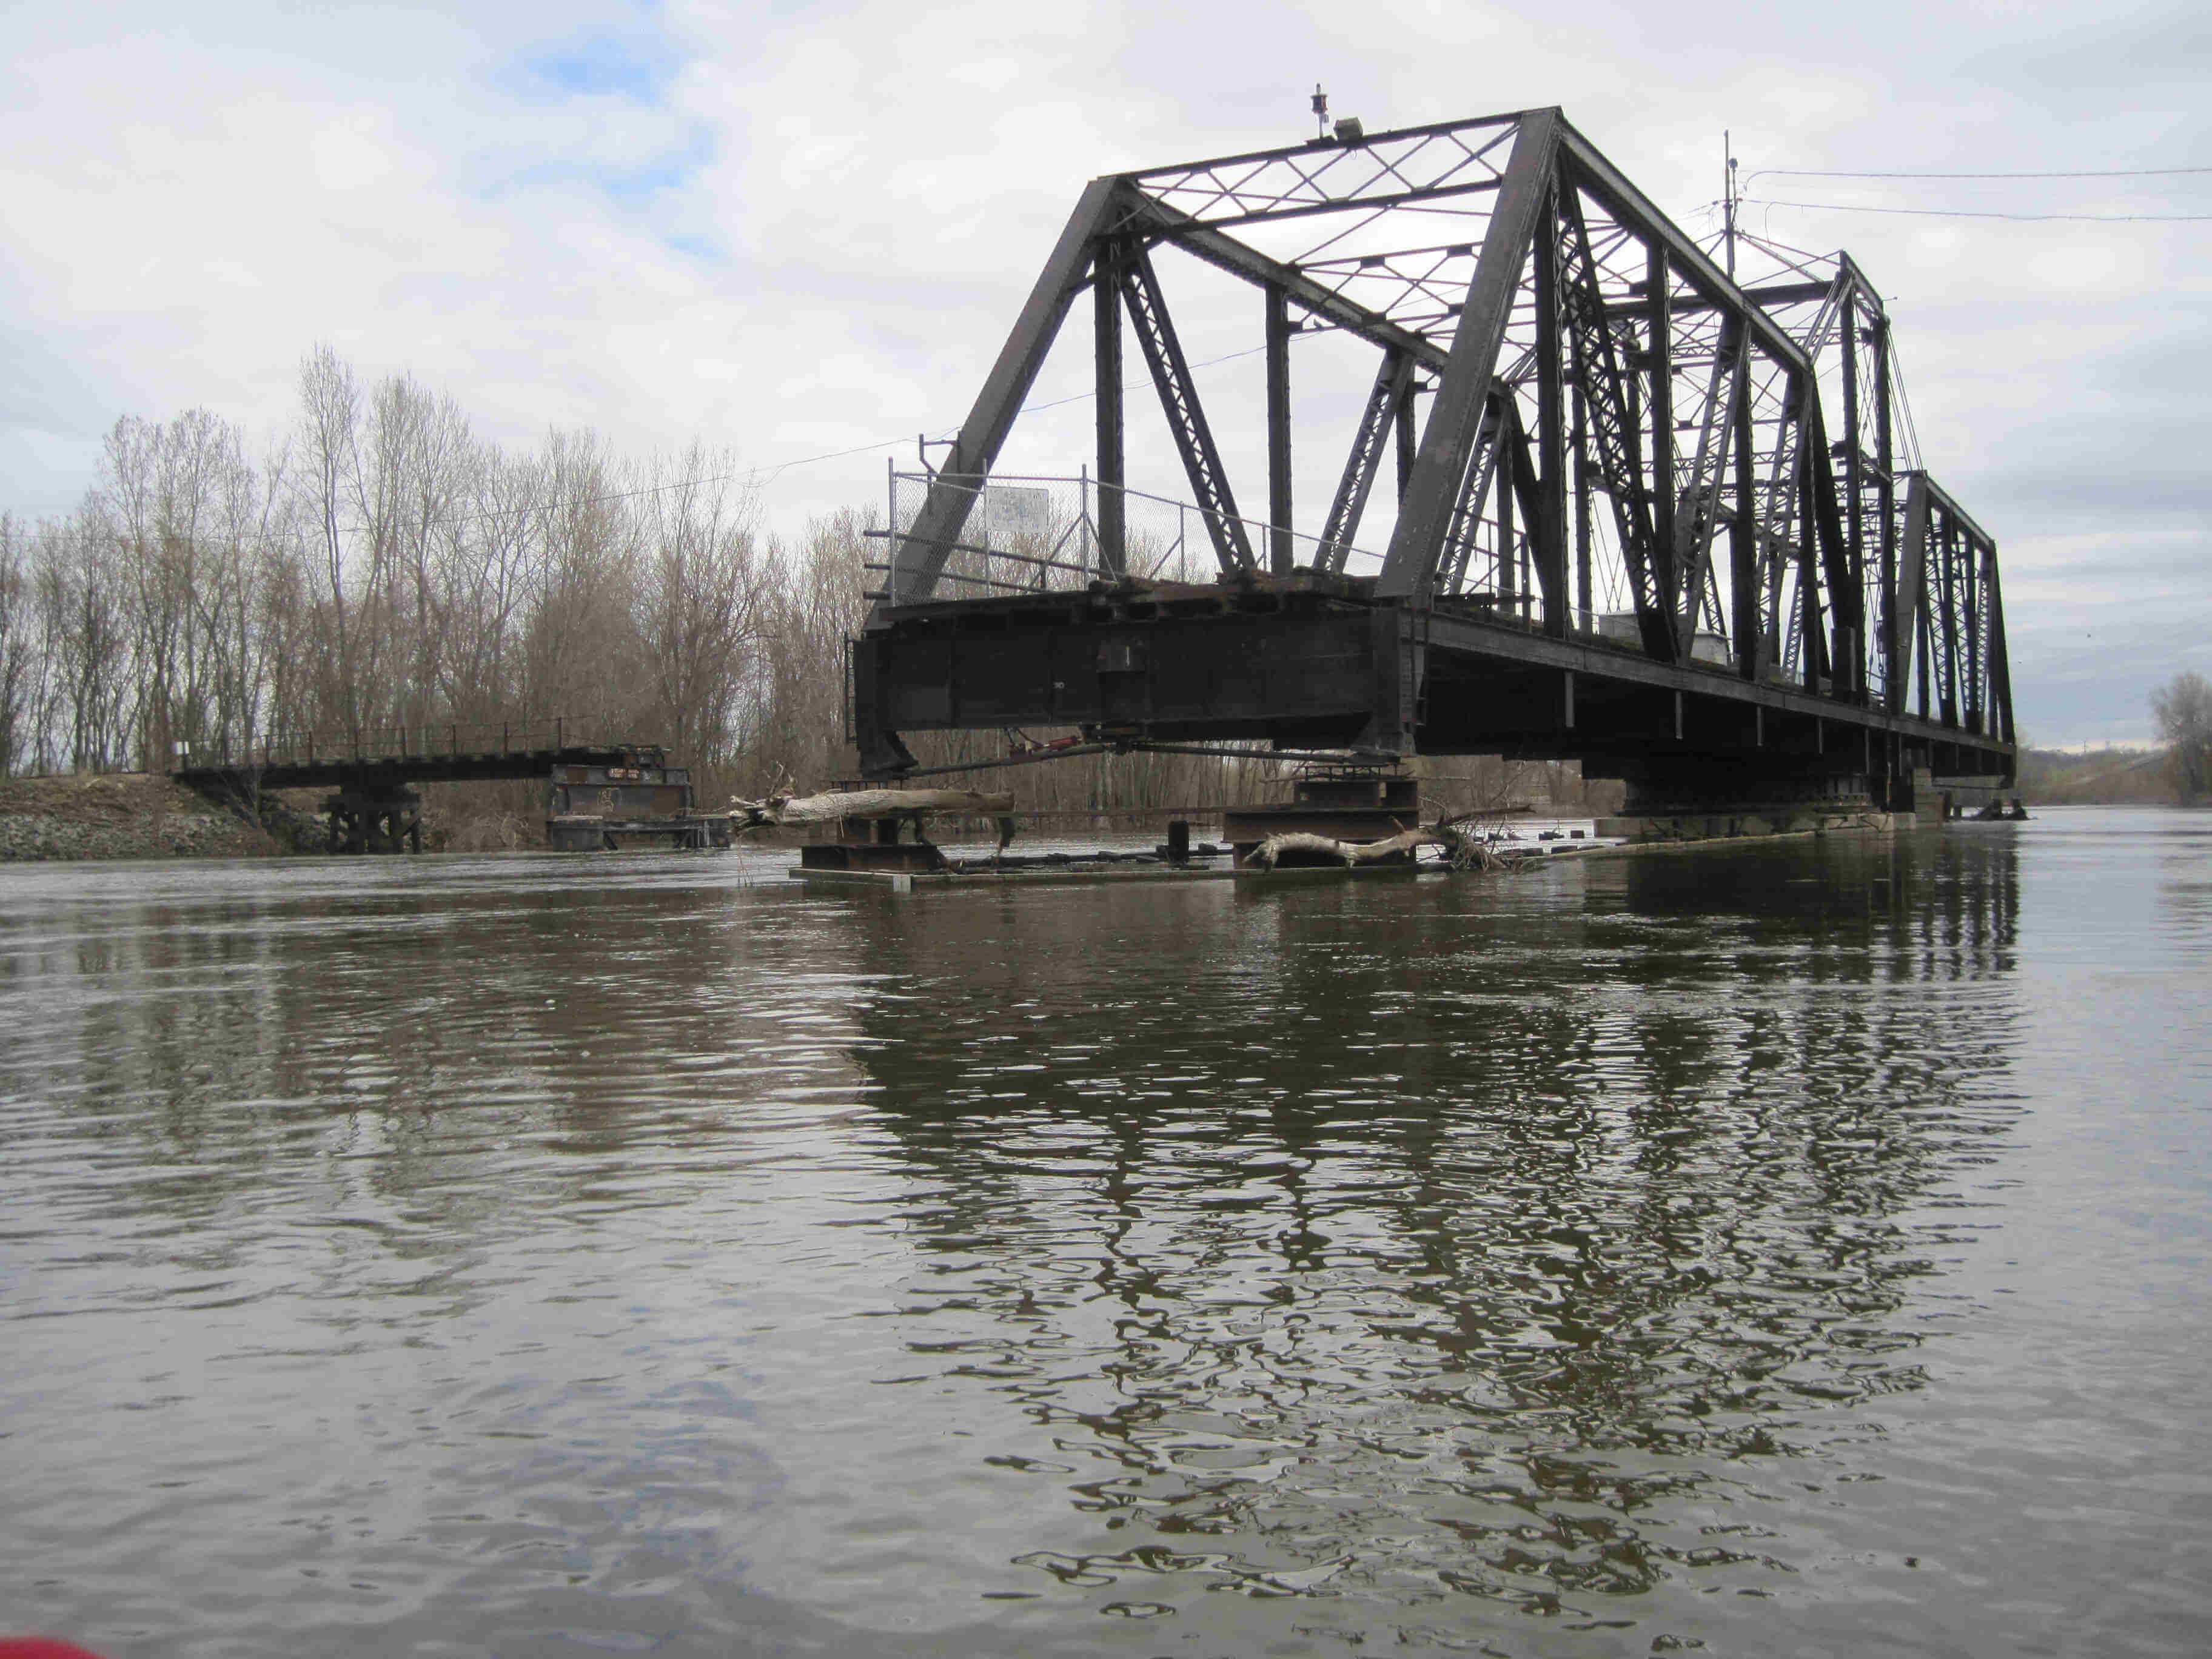 A steel swing bridge on a river, with bare trees in the background